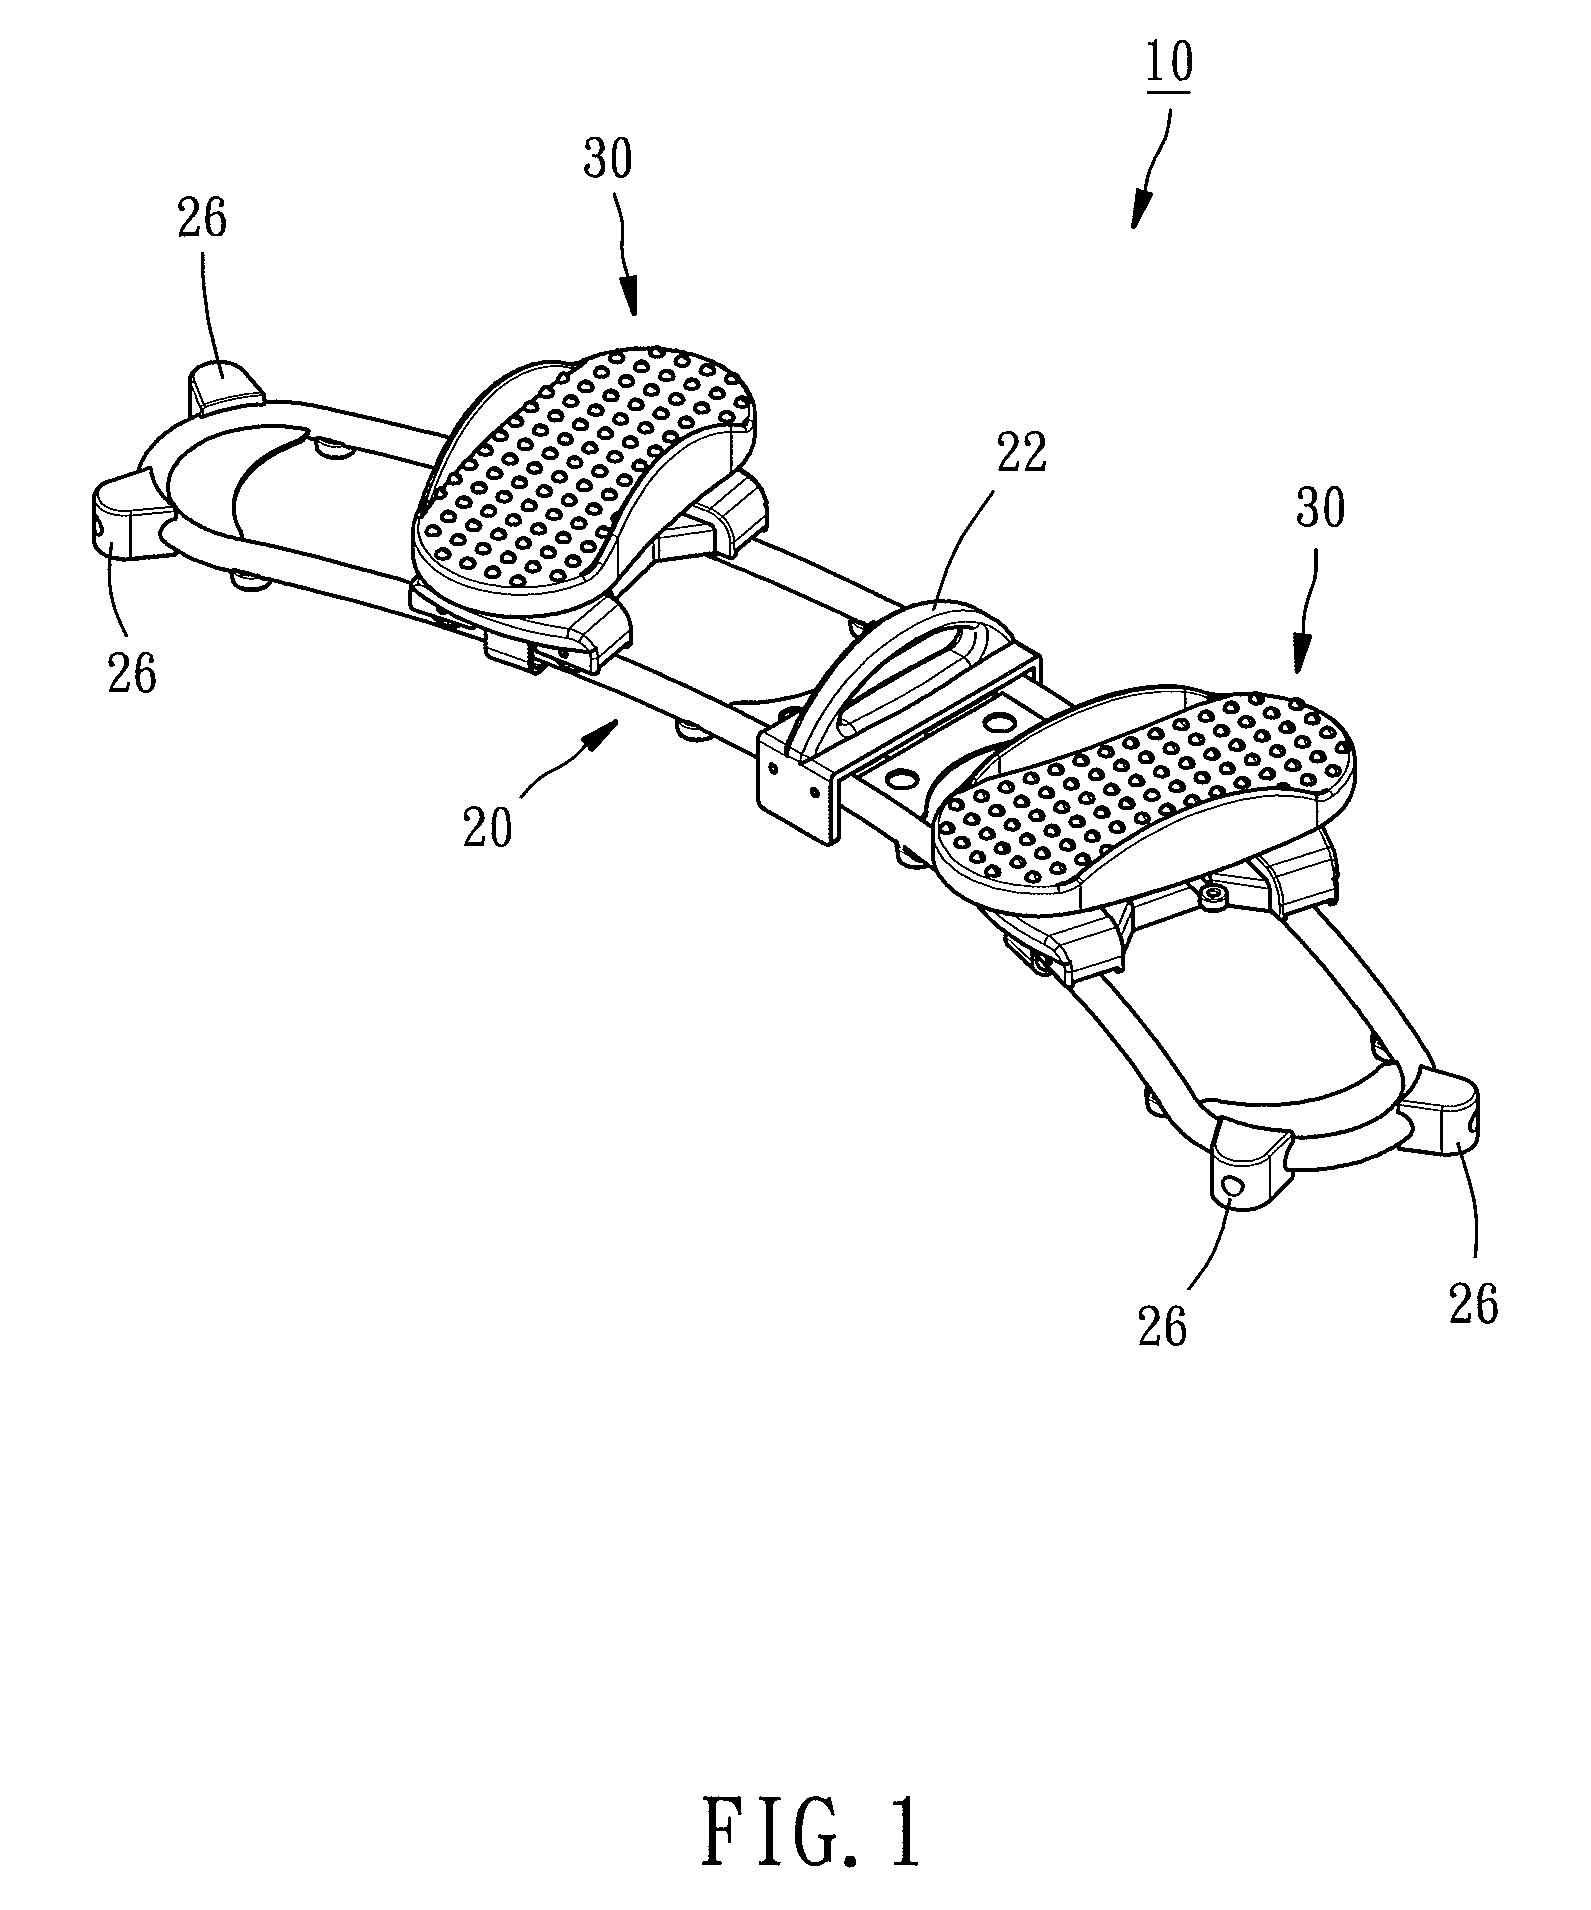 Thigh exercise device